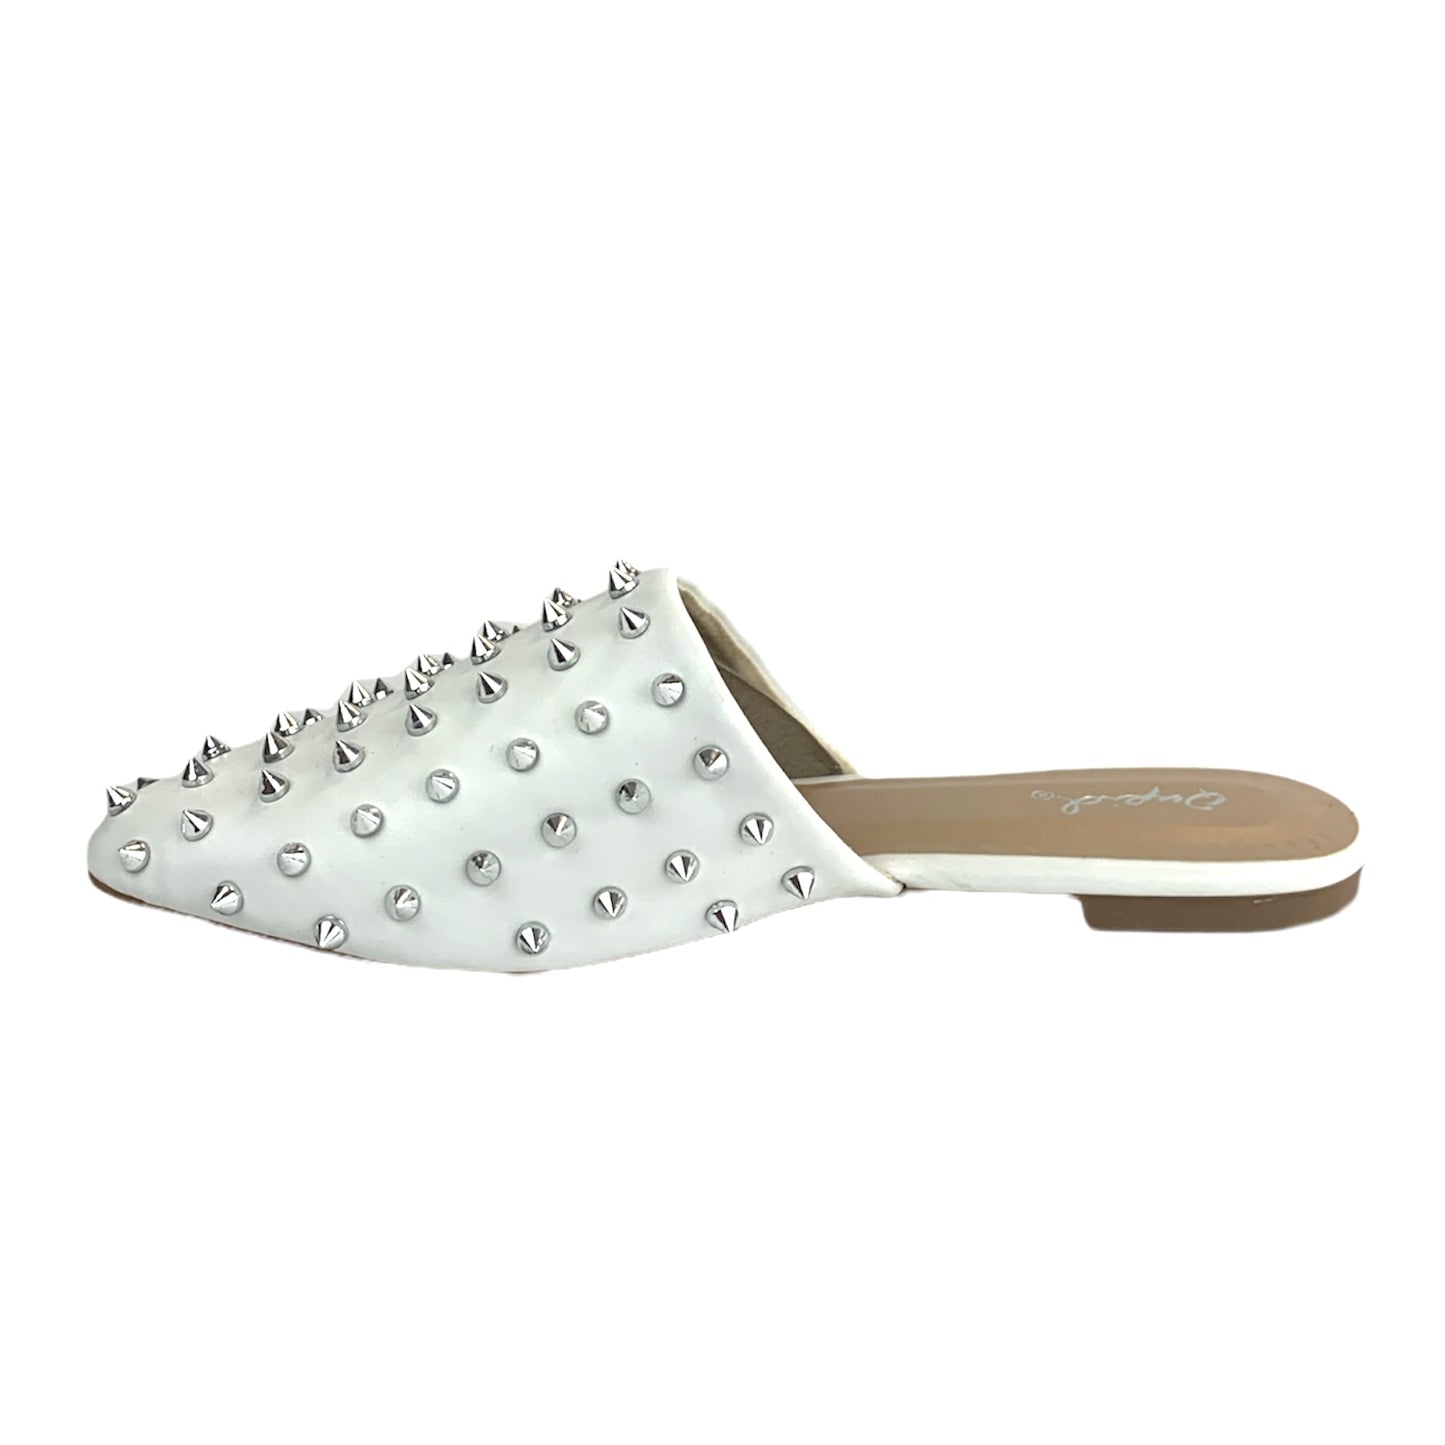 Spike Studded White Flats Pointed Toe Mules Size 6 Women's Shoes